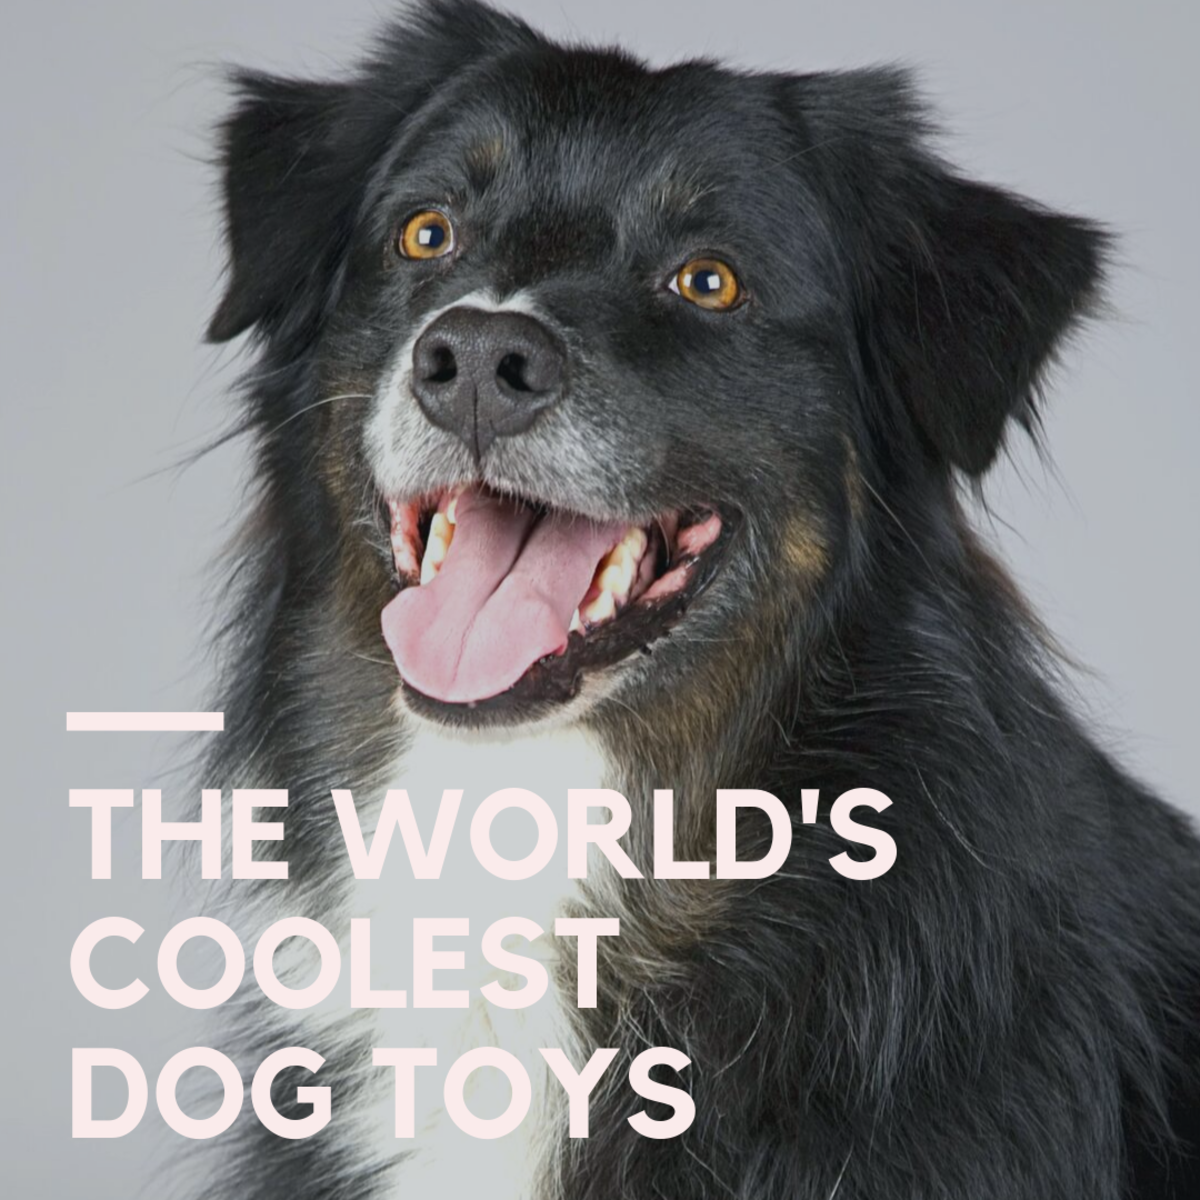 The Coolest Dog Toys On Planet